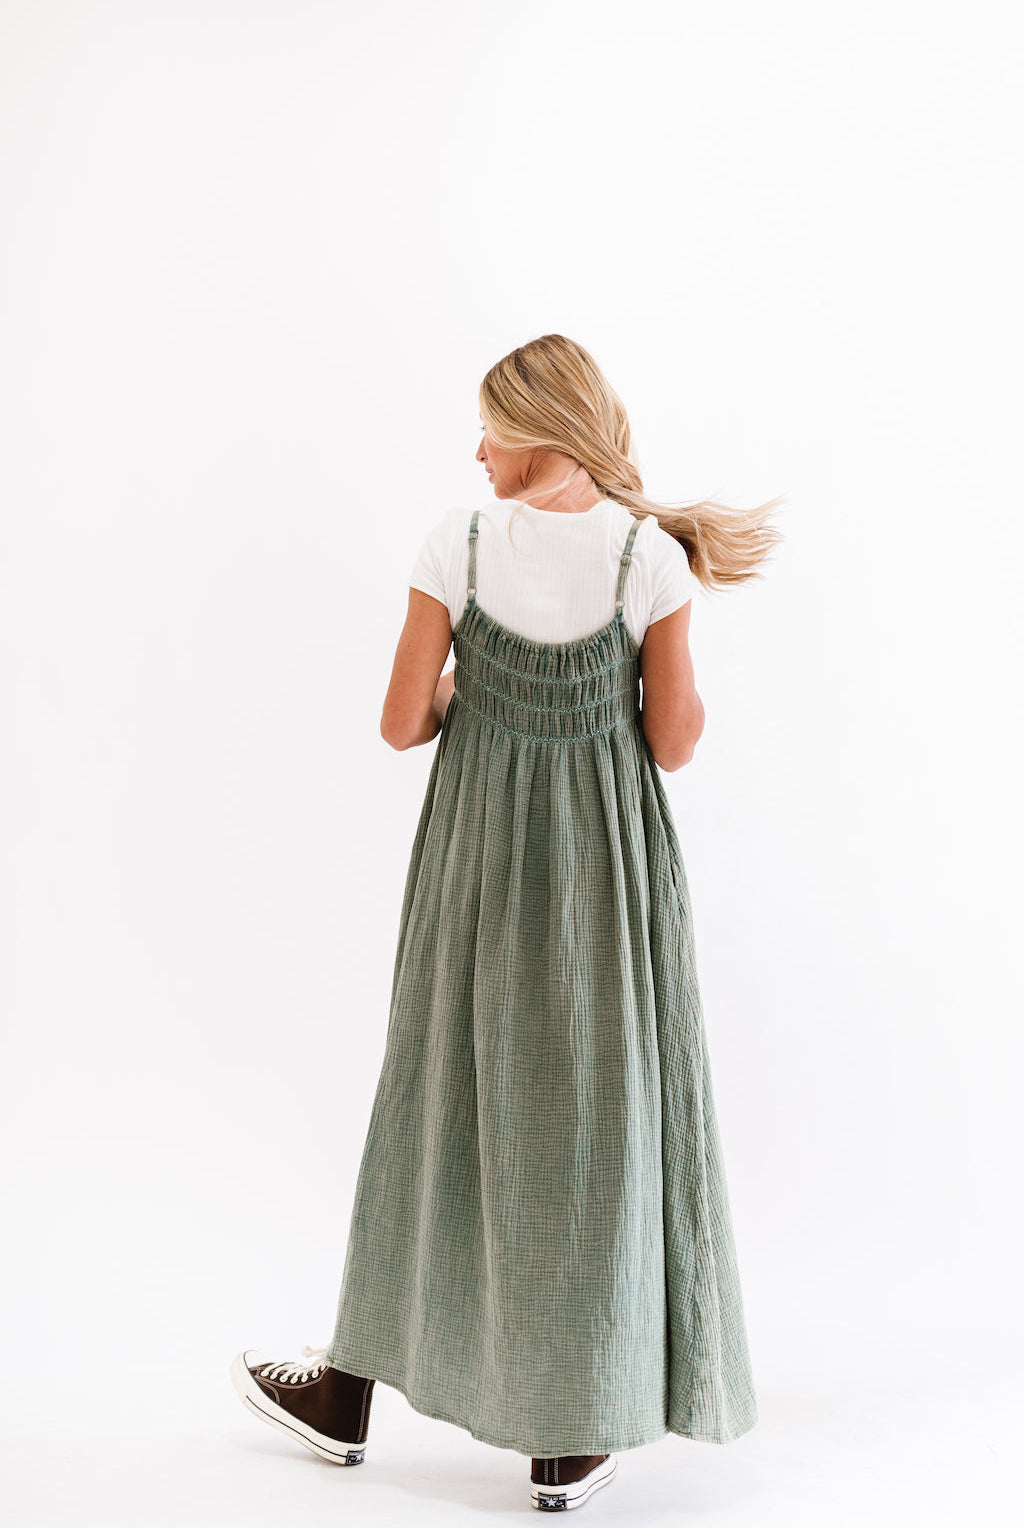 LDS Sister Missionary Overall Dress